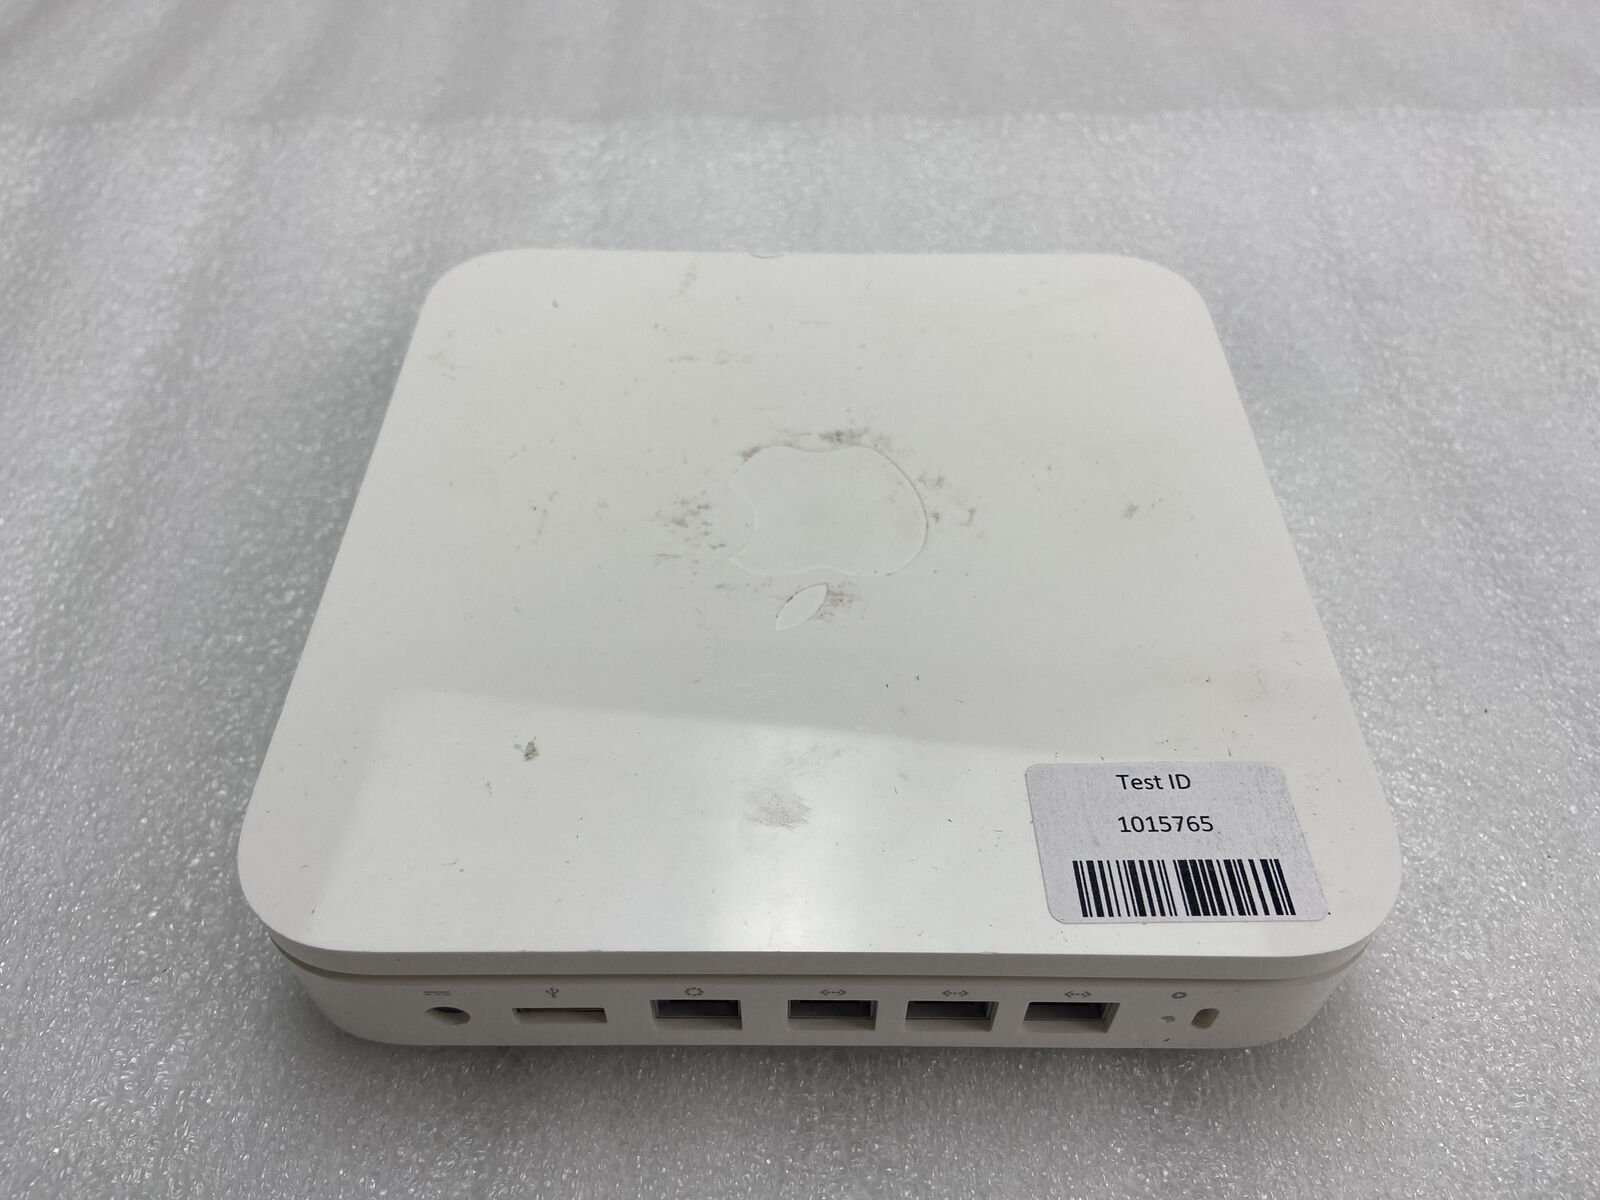 Apple AirPort Extreme Base Station 1st Gen A1143 4-Port Wireless Router WORKS